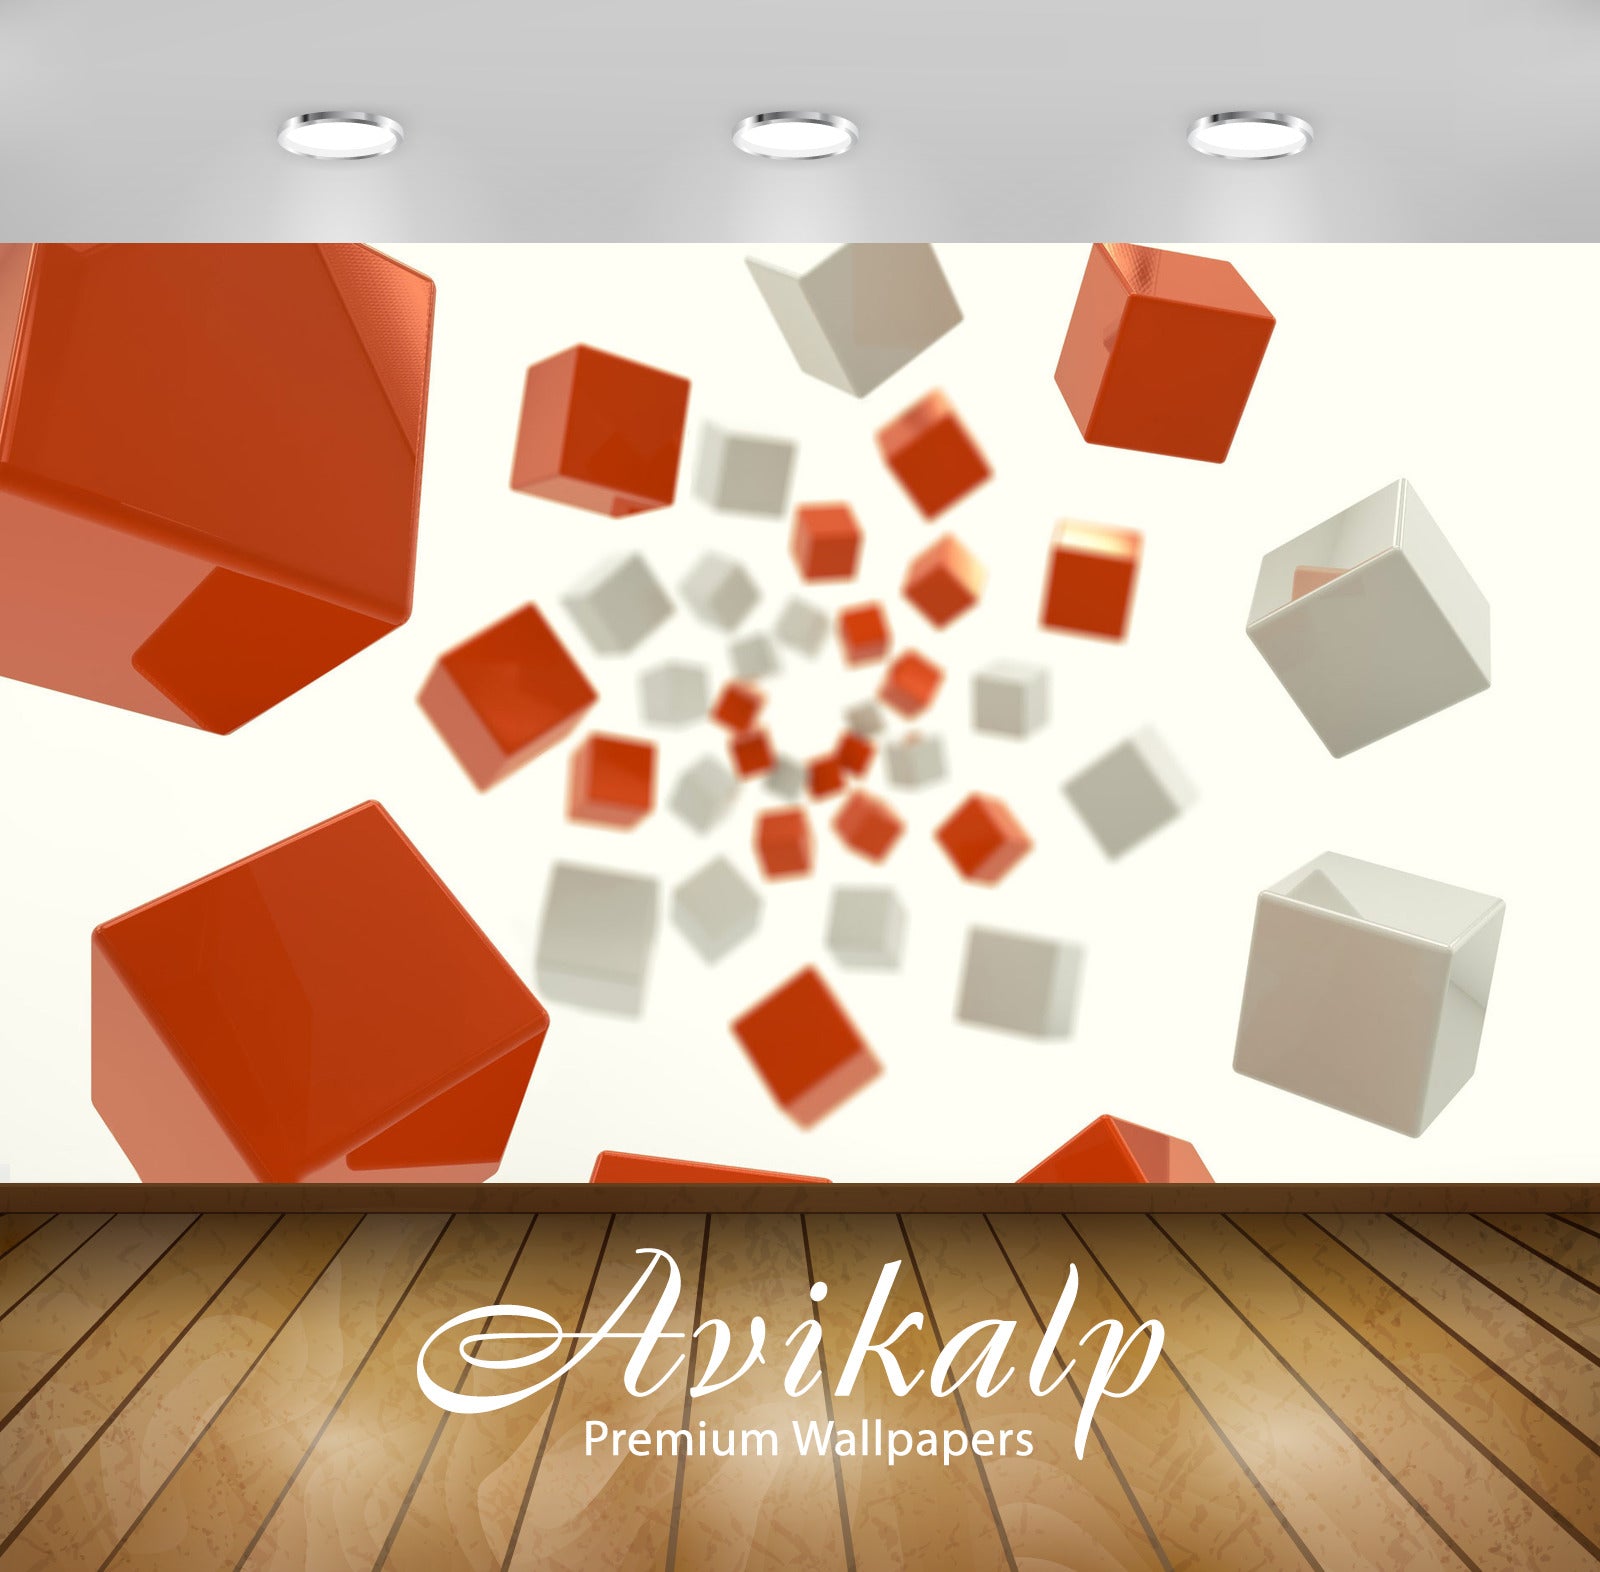 Avikalp Exclusive Awi4041 White And Orange Floating Cubes Full HD Wallpapers for Living room, Hall,